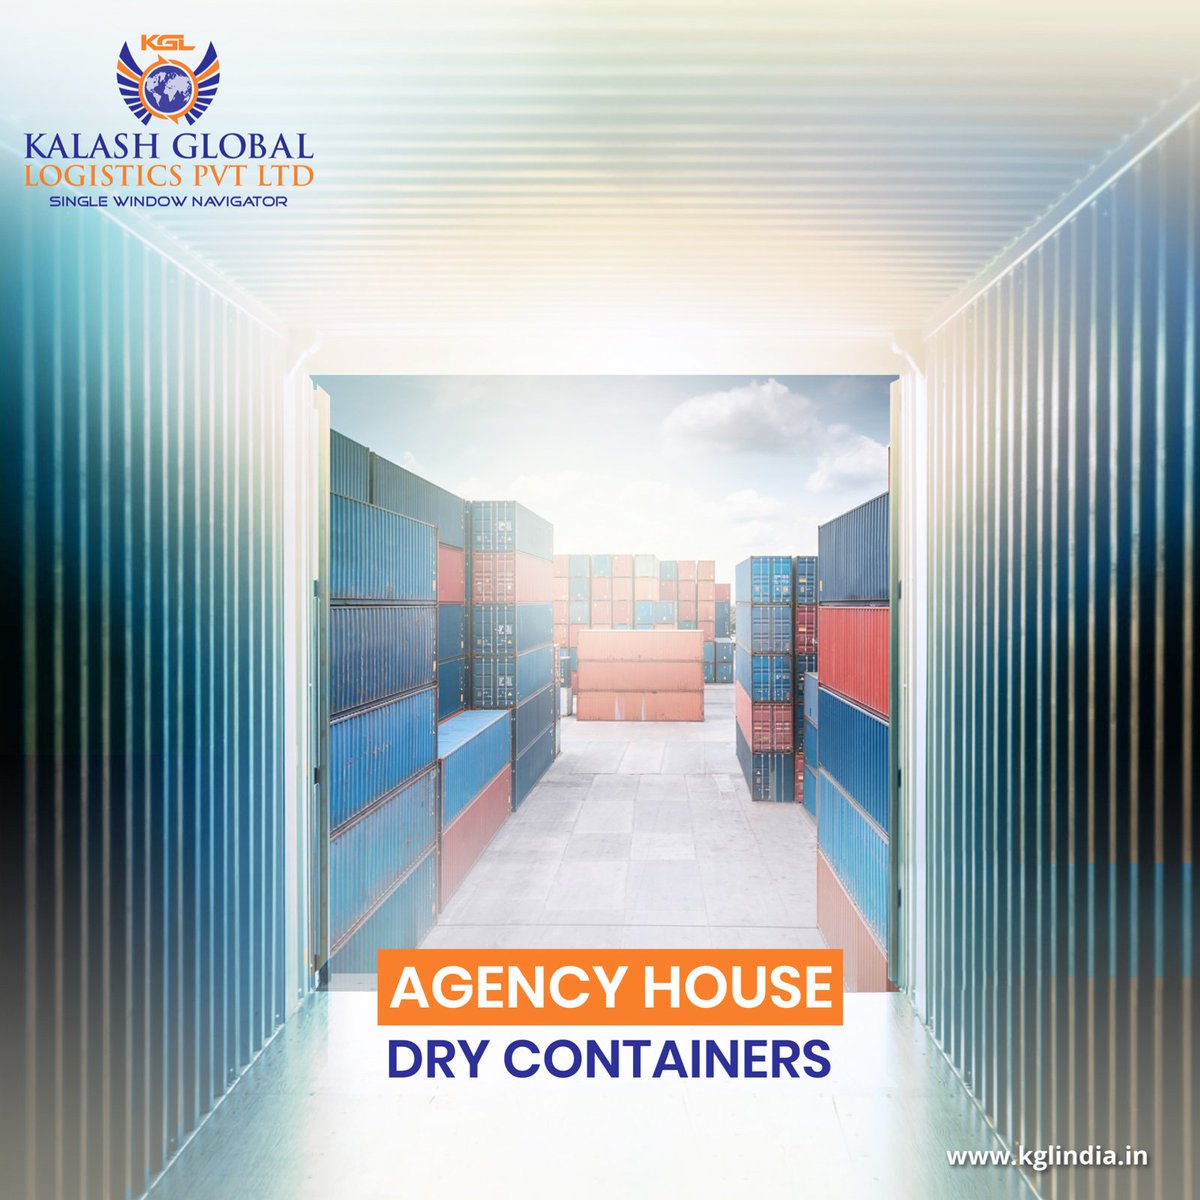 Carry your cargo safely with our Dry container services. Shipping Globally through India

#drycontainer #shippingcontainers #agency #shippingagency #nvocc #logistics #fullcontainer #shipping #FCL #KalashGlobalLogistics